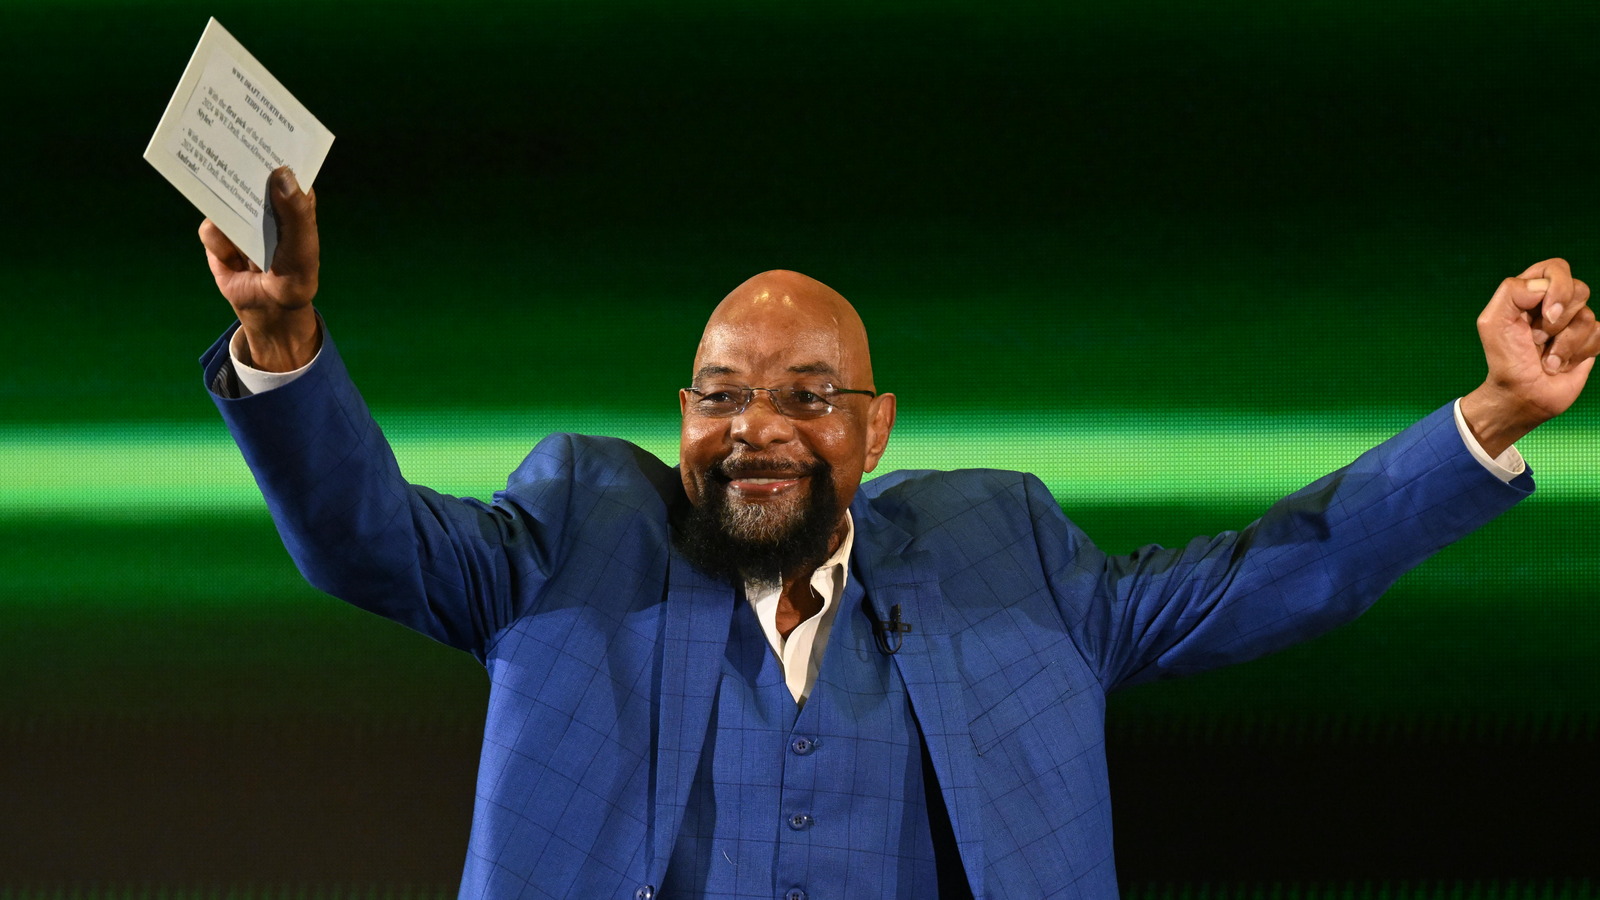 Teddy Long Reacts To AEW's Focus On Swerve Strickland Being First Black Champion